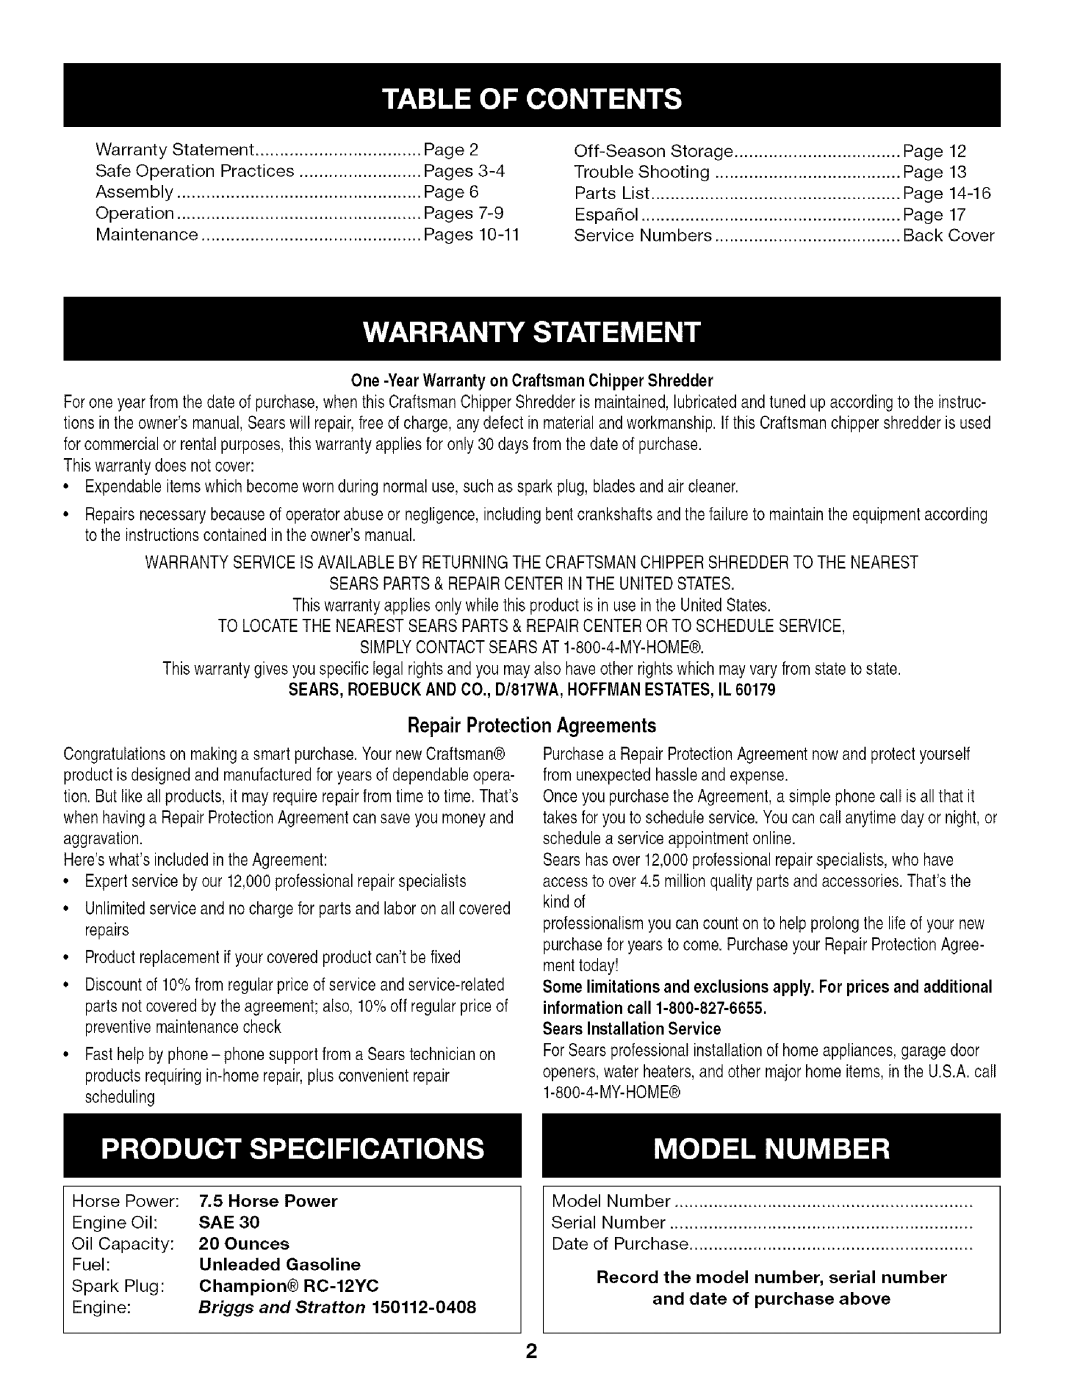 Craftsman 247.776360 manual Page2, Page12, Pages3-4, Page13, Page6, Pages7-9, Page17, Pages10-11, Off-SeasonStorage 